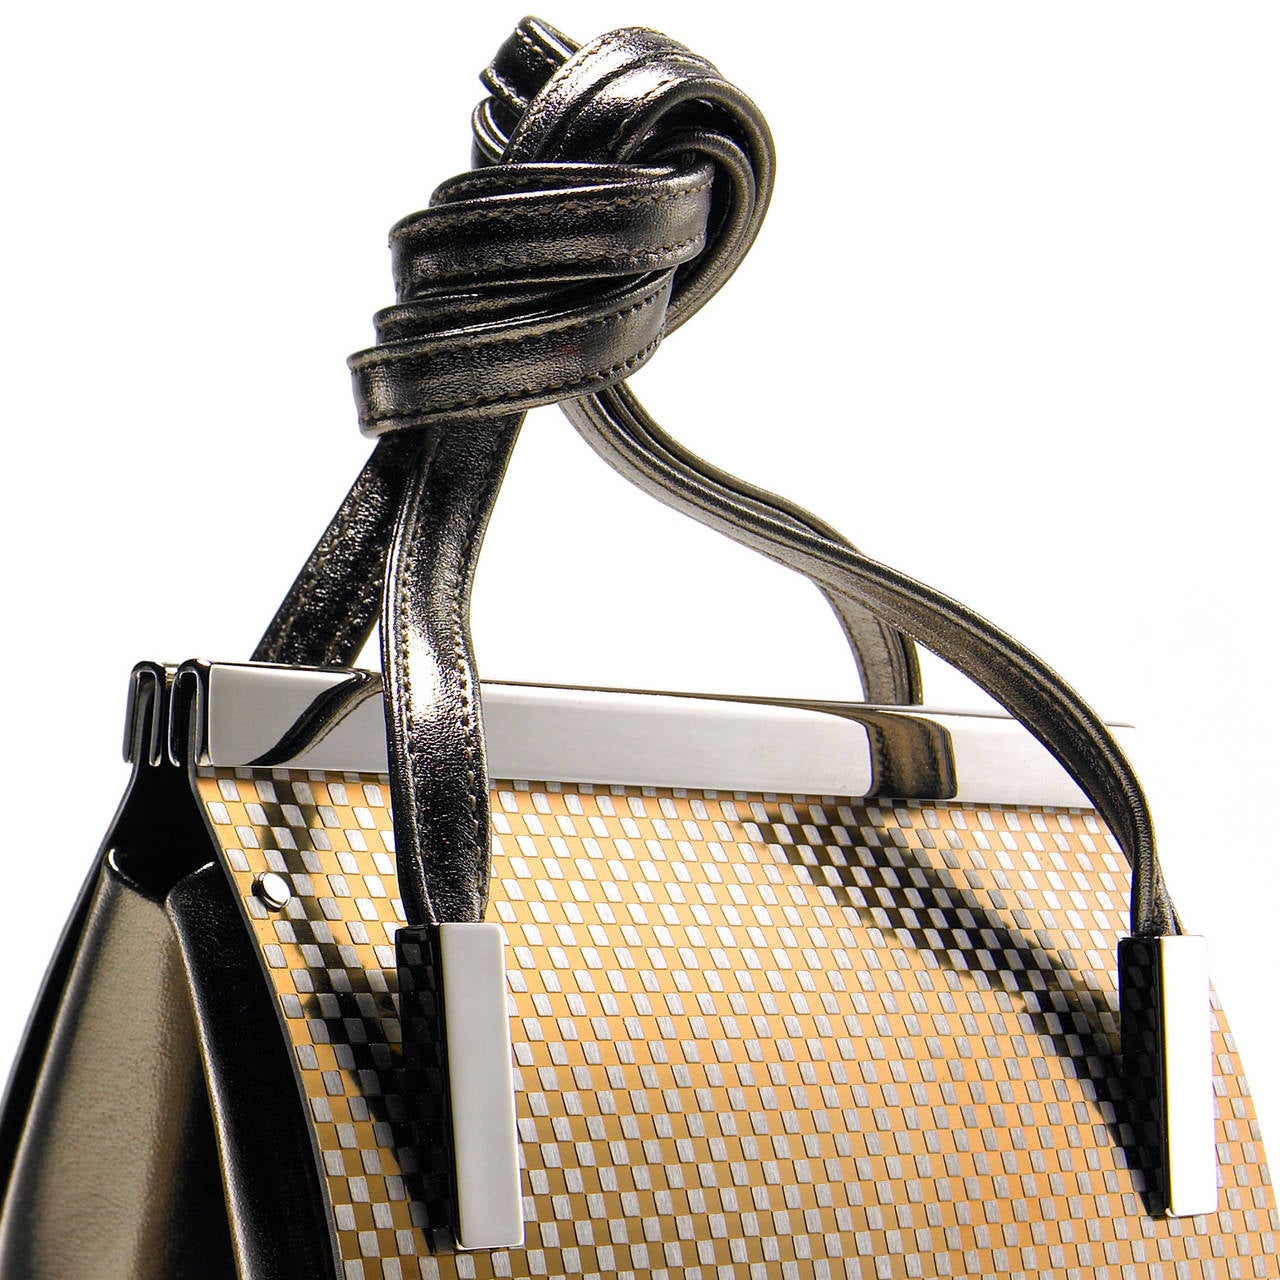 One-of-a-Kind Baltimore Bag handcrafted by Wendy Stevens in gold-checked stainless steel with polished silver hardware and pewter leather strap and accents. Bag measures 6.5